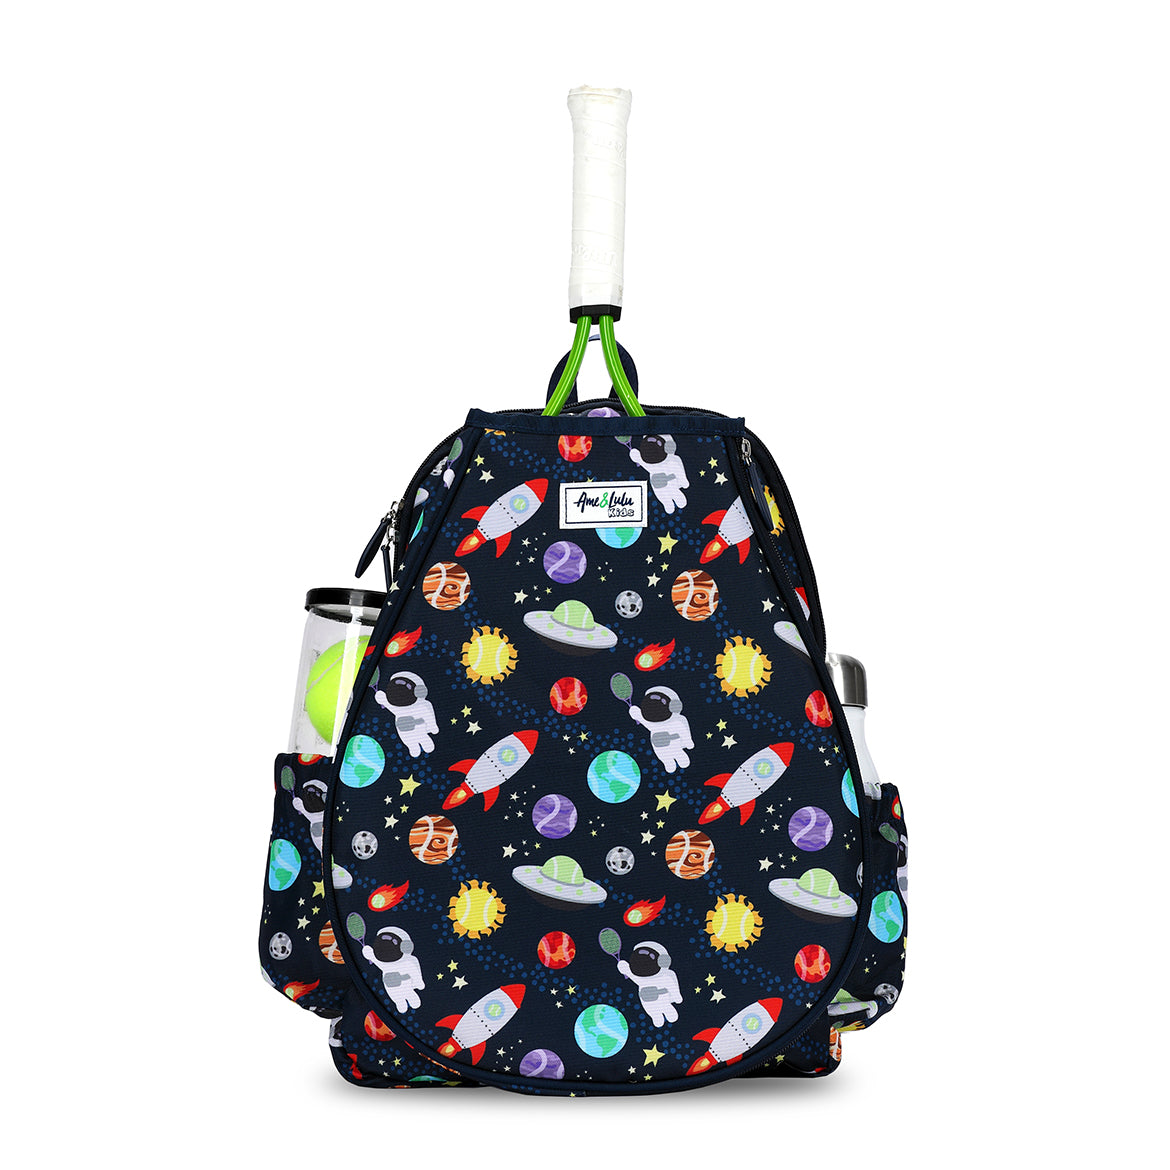 Front view of navy kids tennis backpack with space themed icons such as planets, spaceships, ufos and tennis balls.